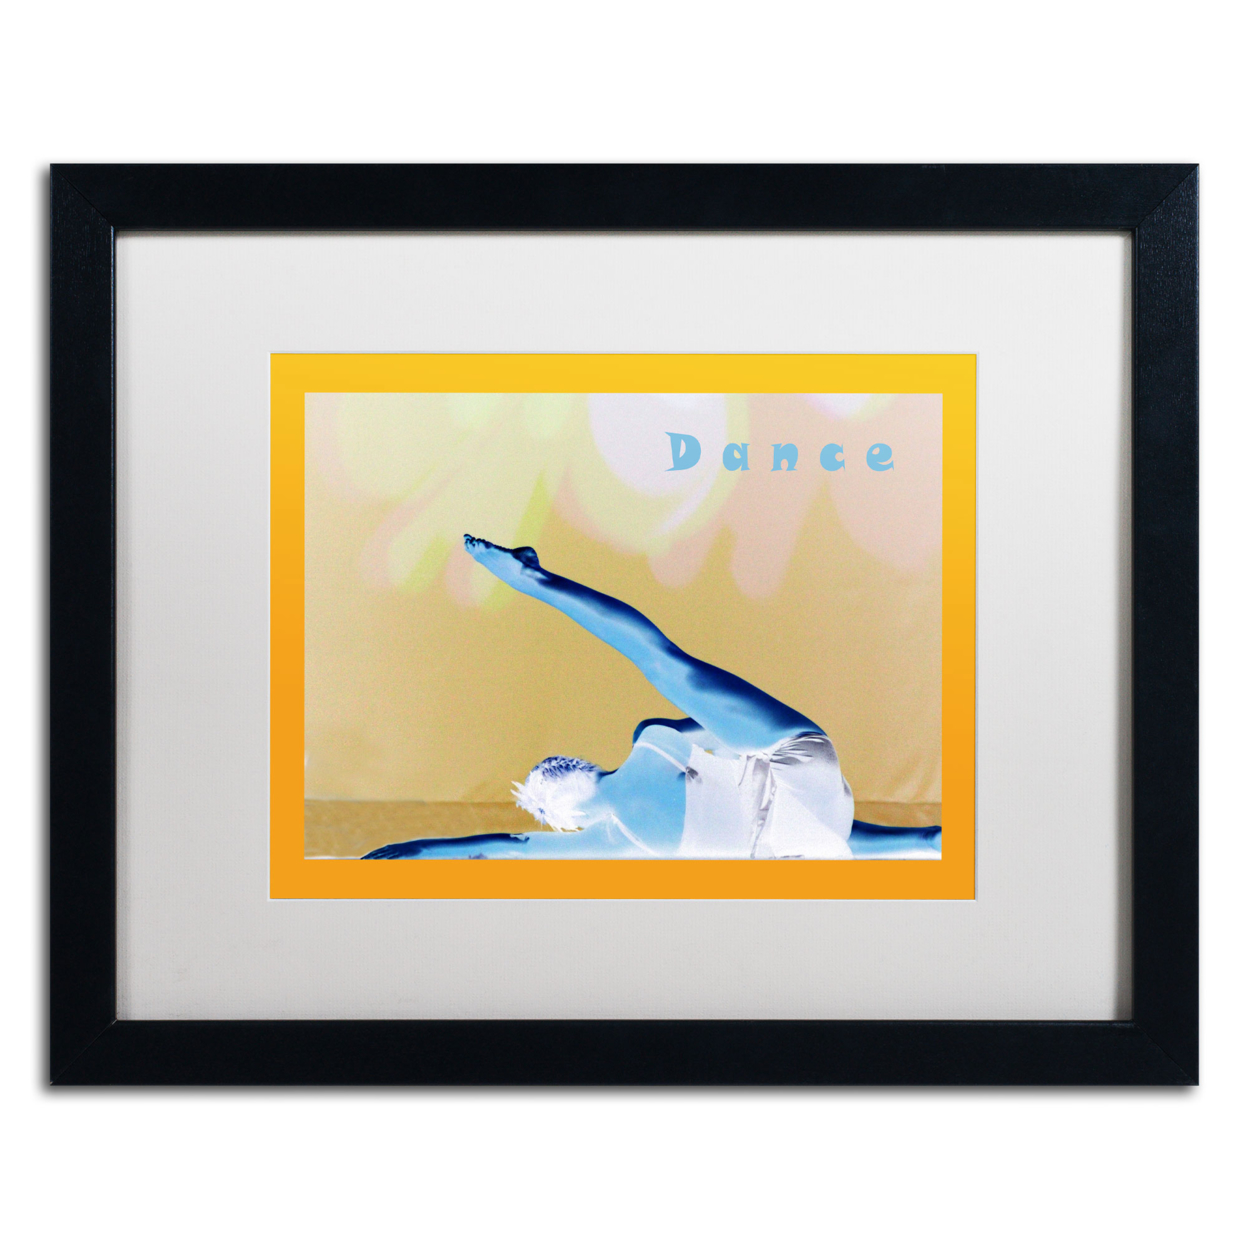 Patty Tuggle 'Dance' Black Wooden Framed Art 18 X 22 Inches